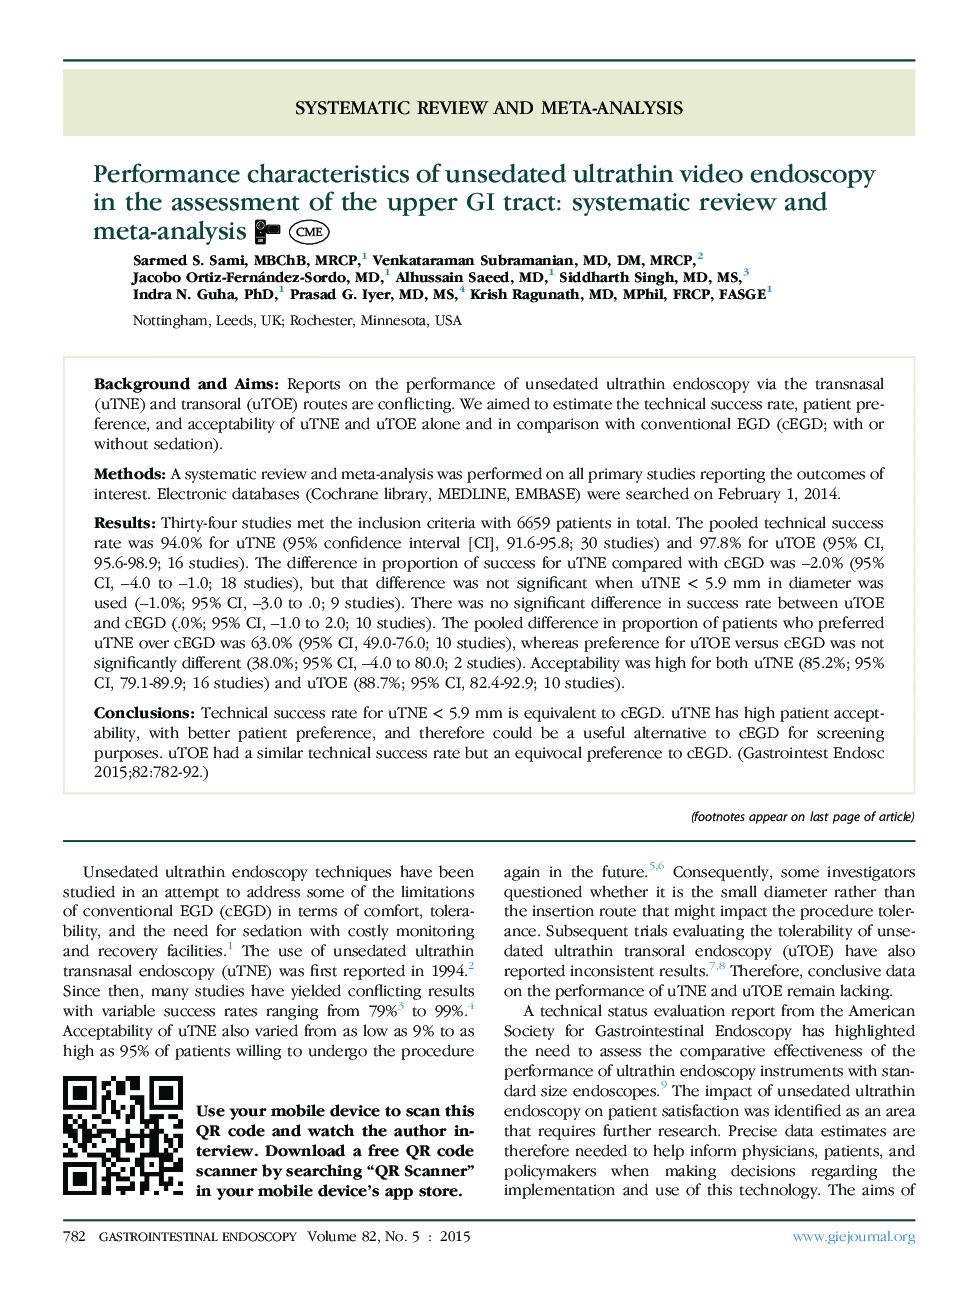 Performance characteristics of unsedated ultrathin video endoscopy in the assessment of the upper GI tract: systematic review and meta-analysis 